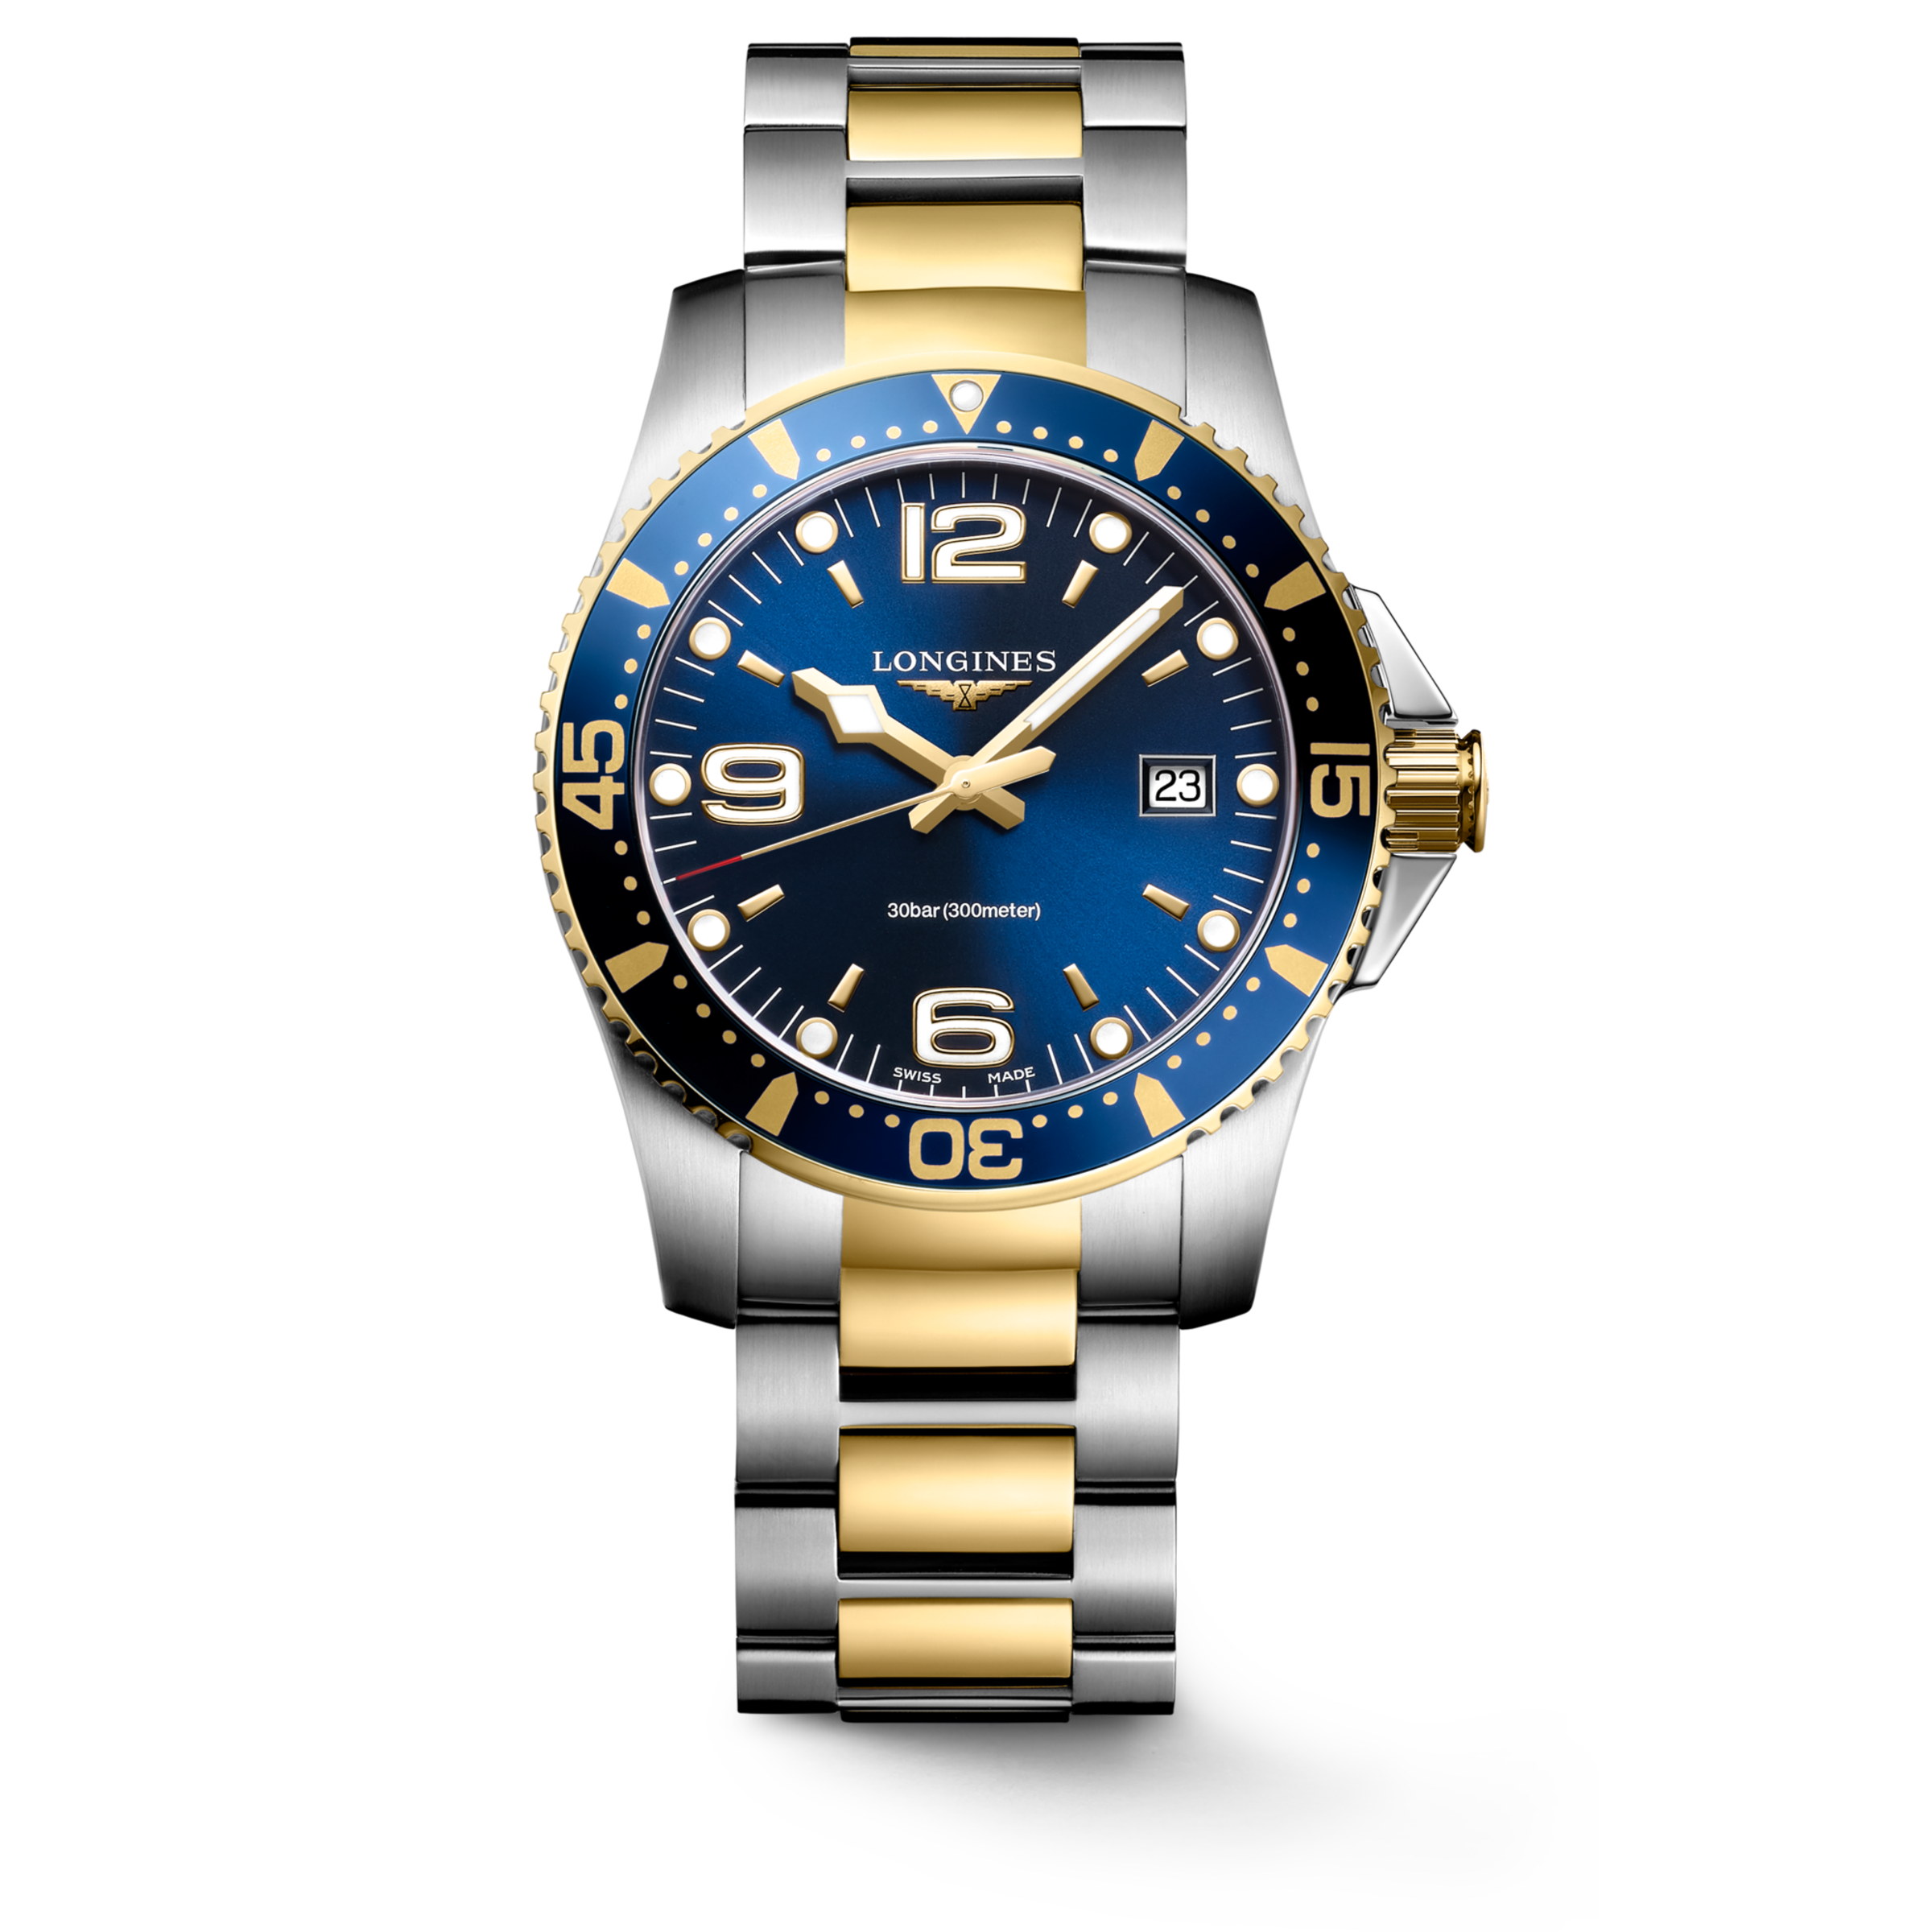 Longines HYDROCONQUEST Quartz Stainless steel and yellow PVD coating Watch - L3.740.3.96.7